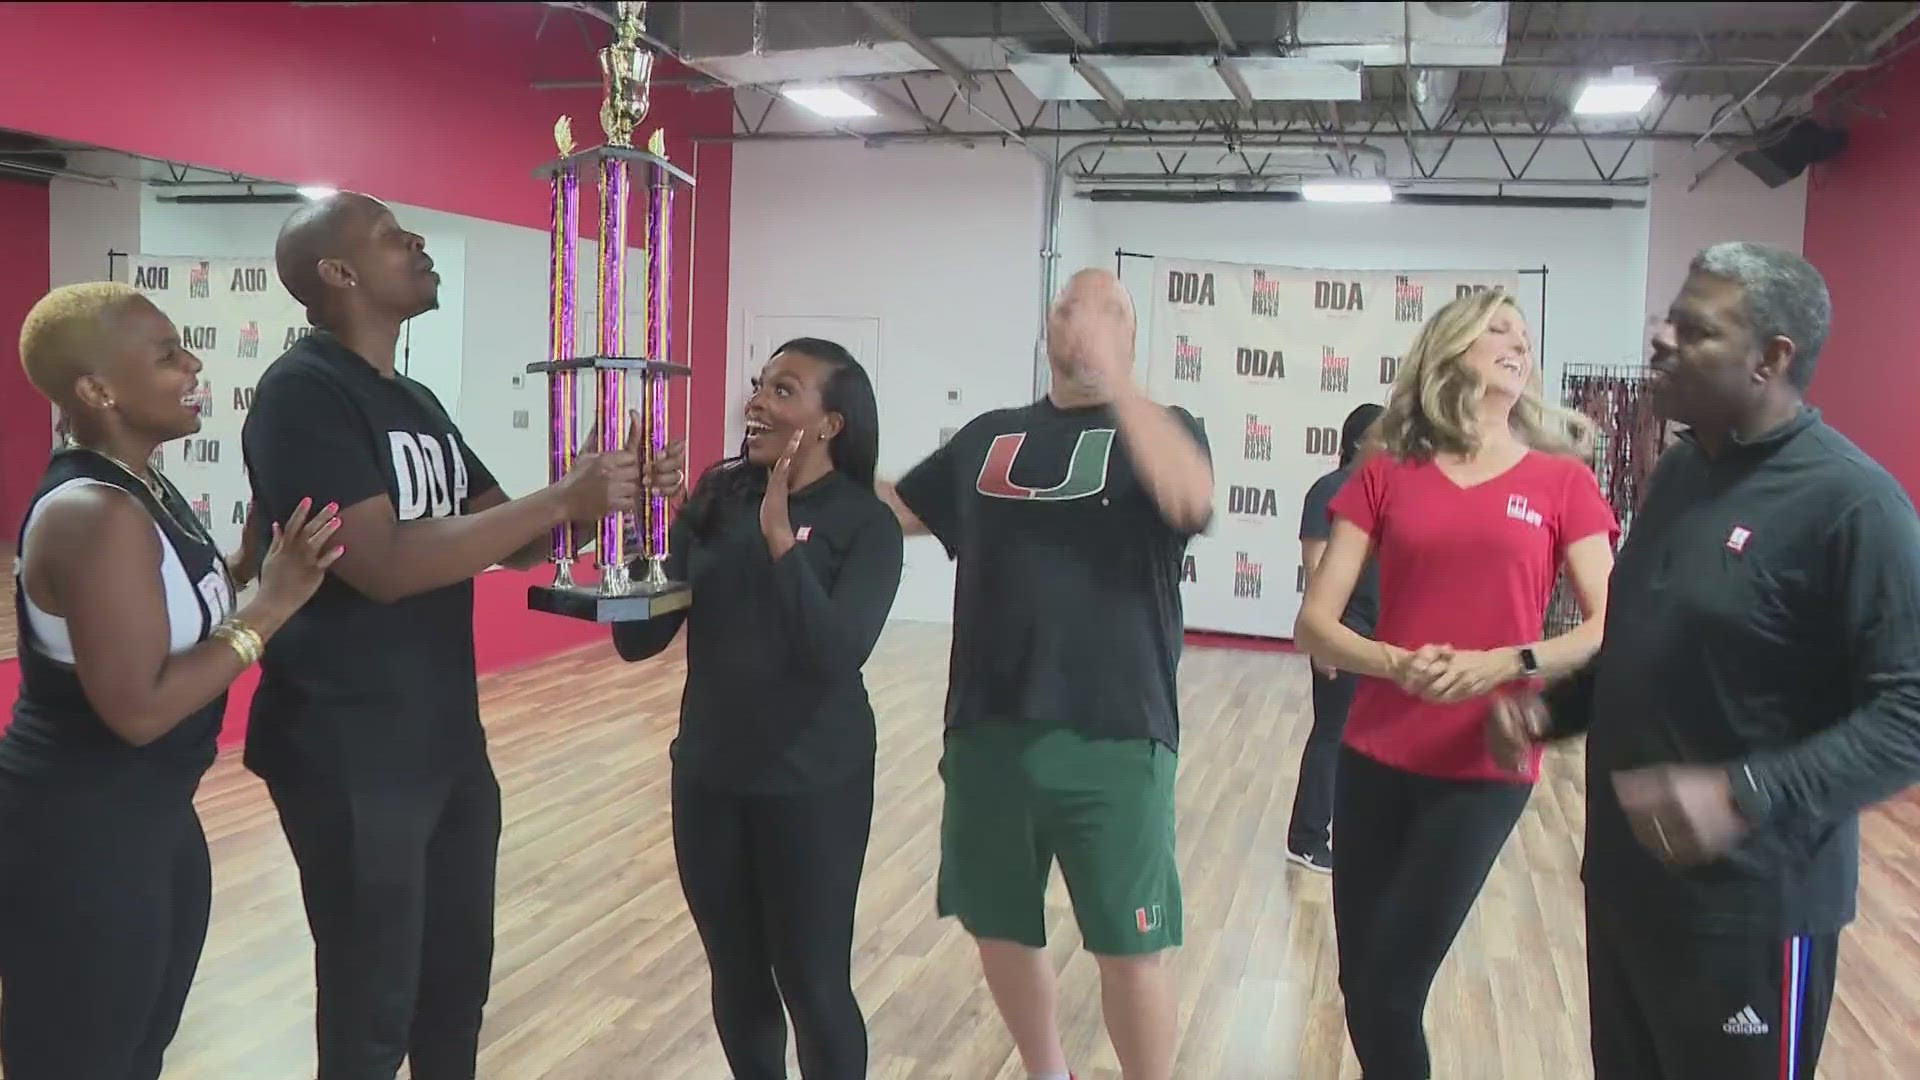 The 11Alive Morning Team came by to get roped into exercise.